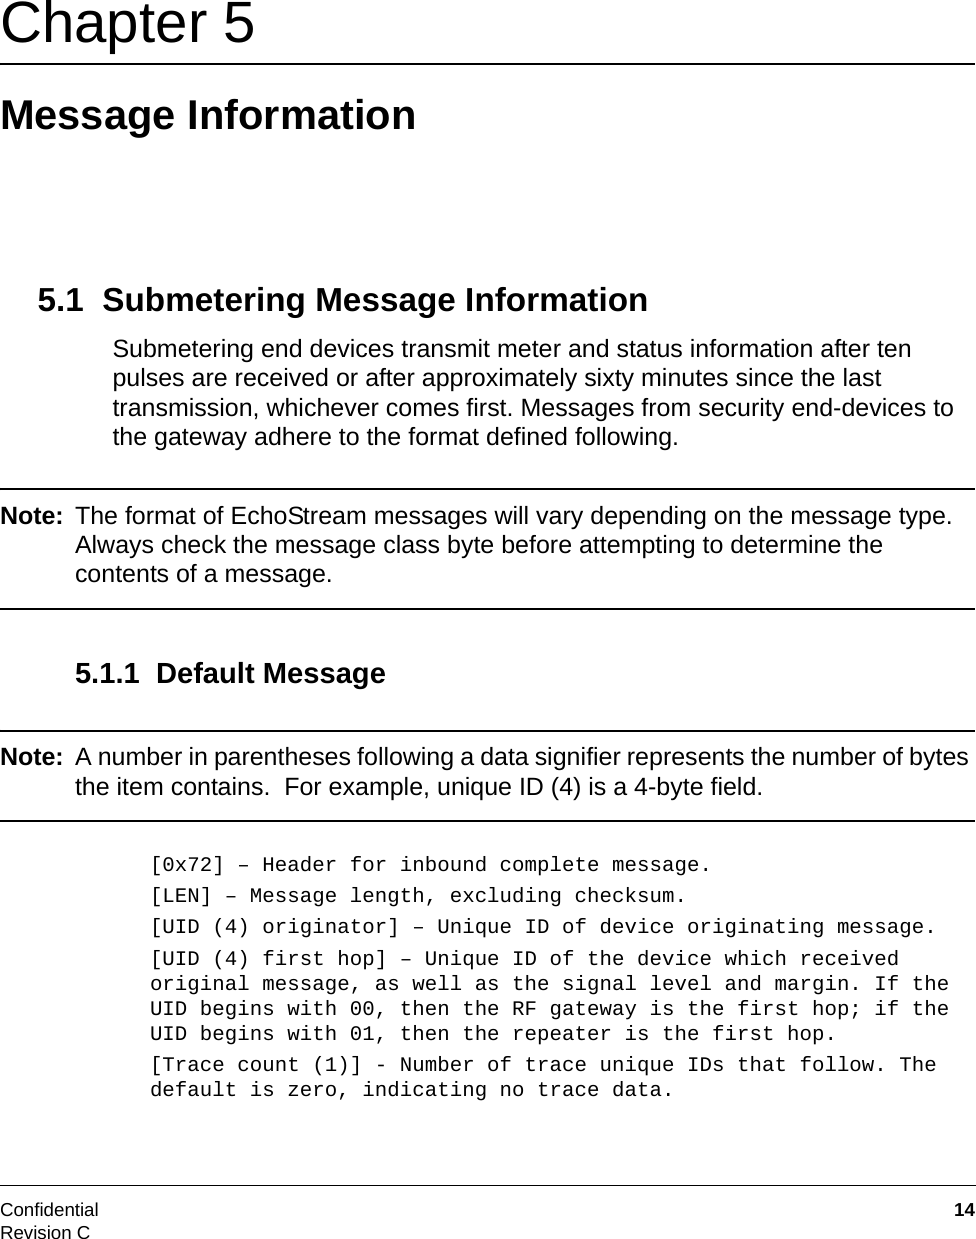 Confidential  14Revision CChapter 5 Message Information5.1  Submetering Message InformationSubmetering end devices transmit meter and status information after ten pulses are received or after approximately sixty minutes since the last transmission, whichever comes first. Messages from security end-devices to the gateway adhere to the format defined following.Note: The format of EchoStream messages will vary depending on the message type. Always check the message class byte before attempting to determine the contents of a message.5.1.1  Default MessageNote: A number in parentheses following a data signifier represents the number of bytes the item contains.  For example, unique ID (4) is a 4-byte field.[0x72] – Header for inbound complete message.[LEN] – Message length, excluding checksum.[UID (4) originator] – Unique ID of device originating message.[UID (4) first hop] – Unique ID of the device which received original message, as well as the signal level and margin. If the UID begins with 00, then the RF gateway is the first hop; if the UID begins with 01, then the repeater is the first hop.[Trace count (1)] - Number of trace unique IDs that follow. The default is zero, indicating no trace data.